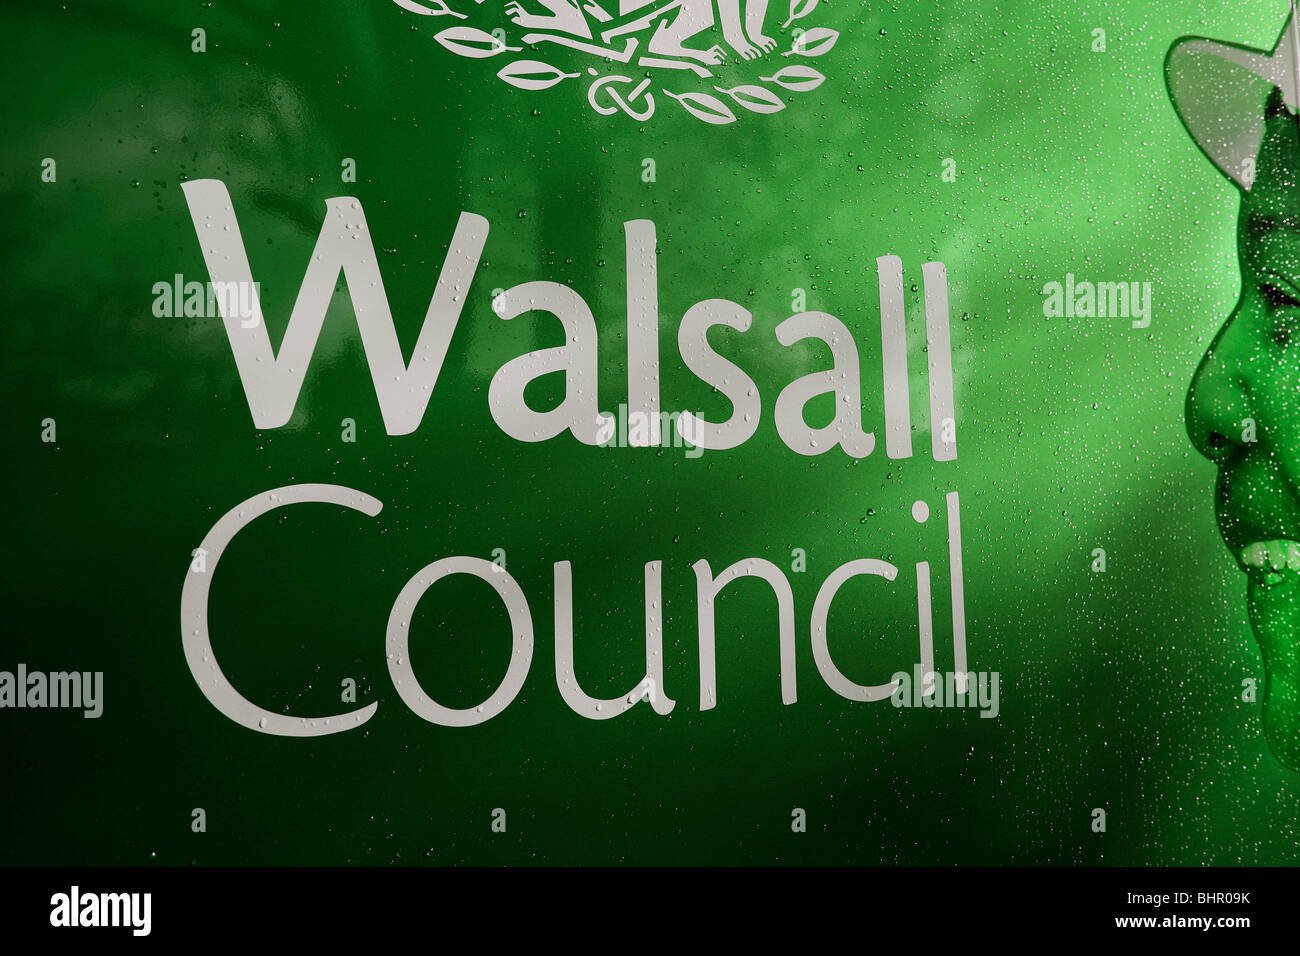 Walsall,Council,Green,energy,climate,recycle,logo Stock Photo